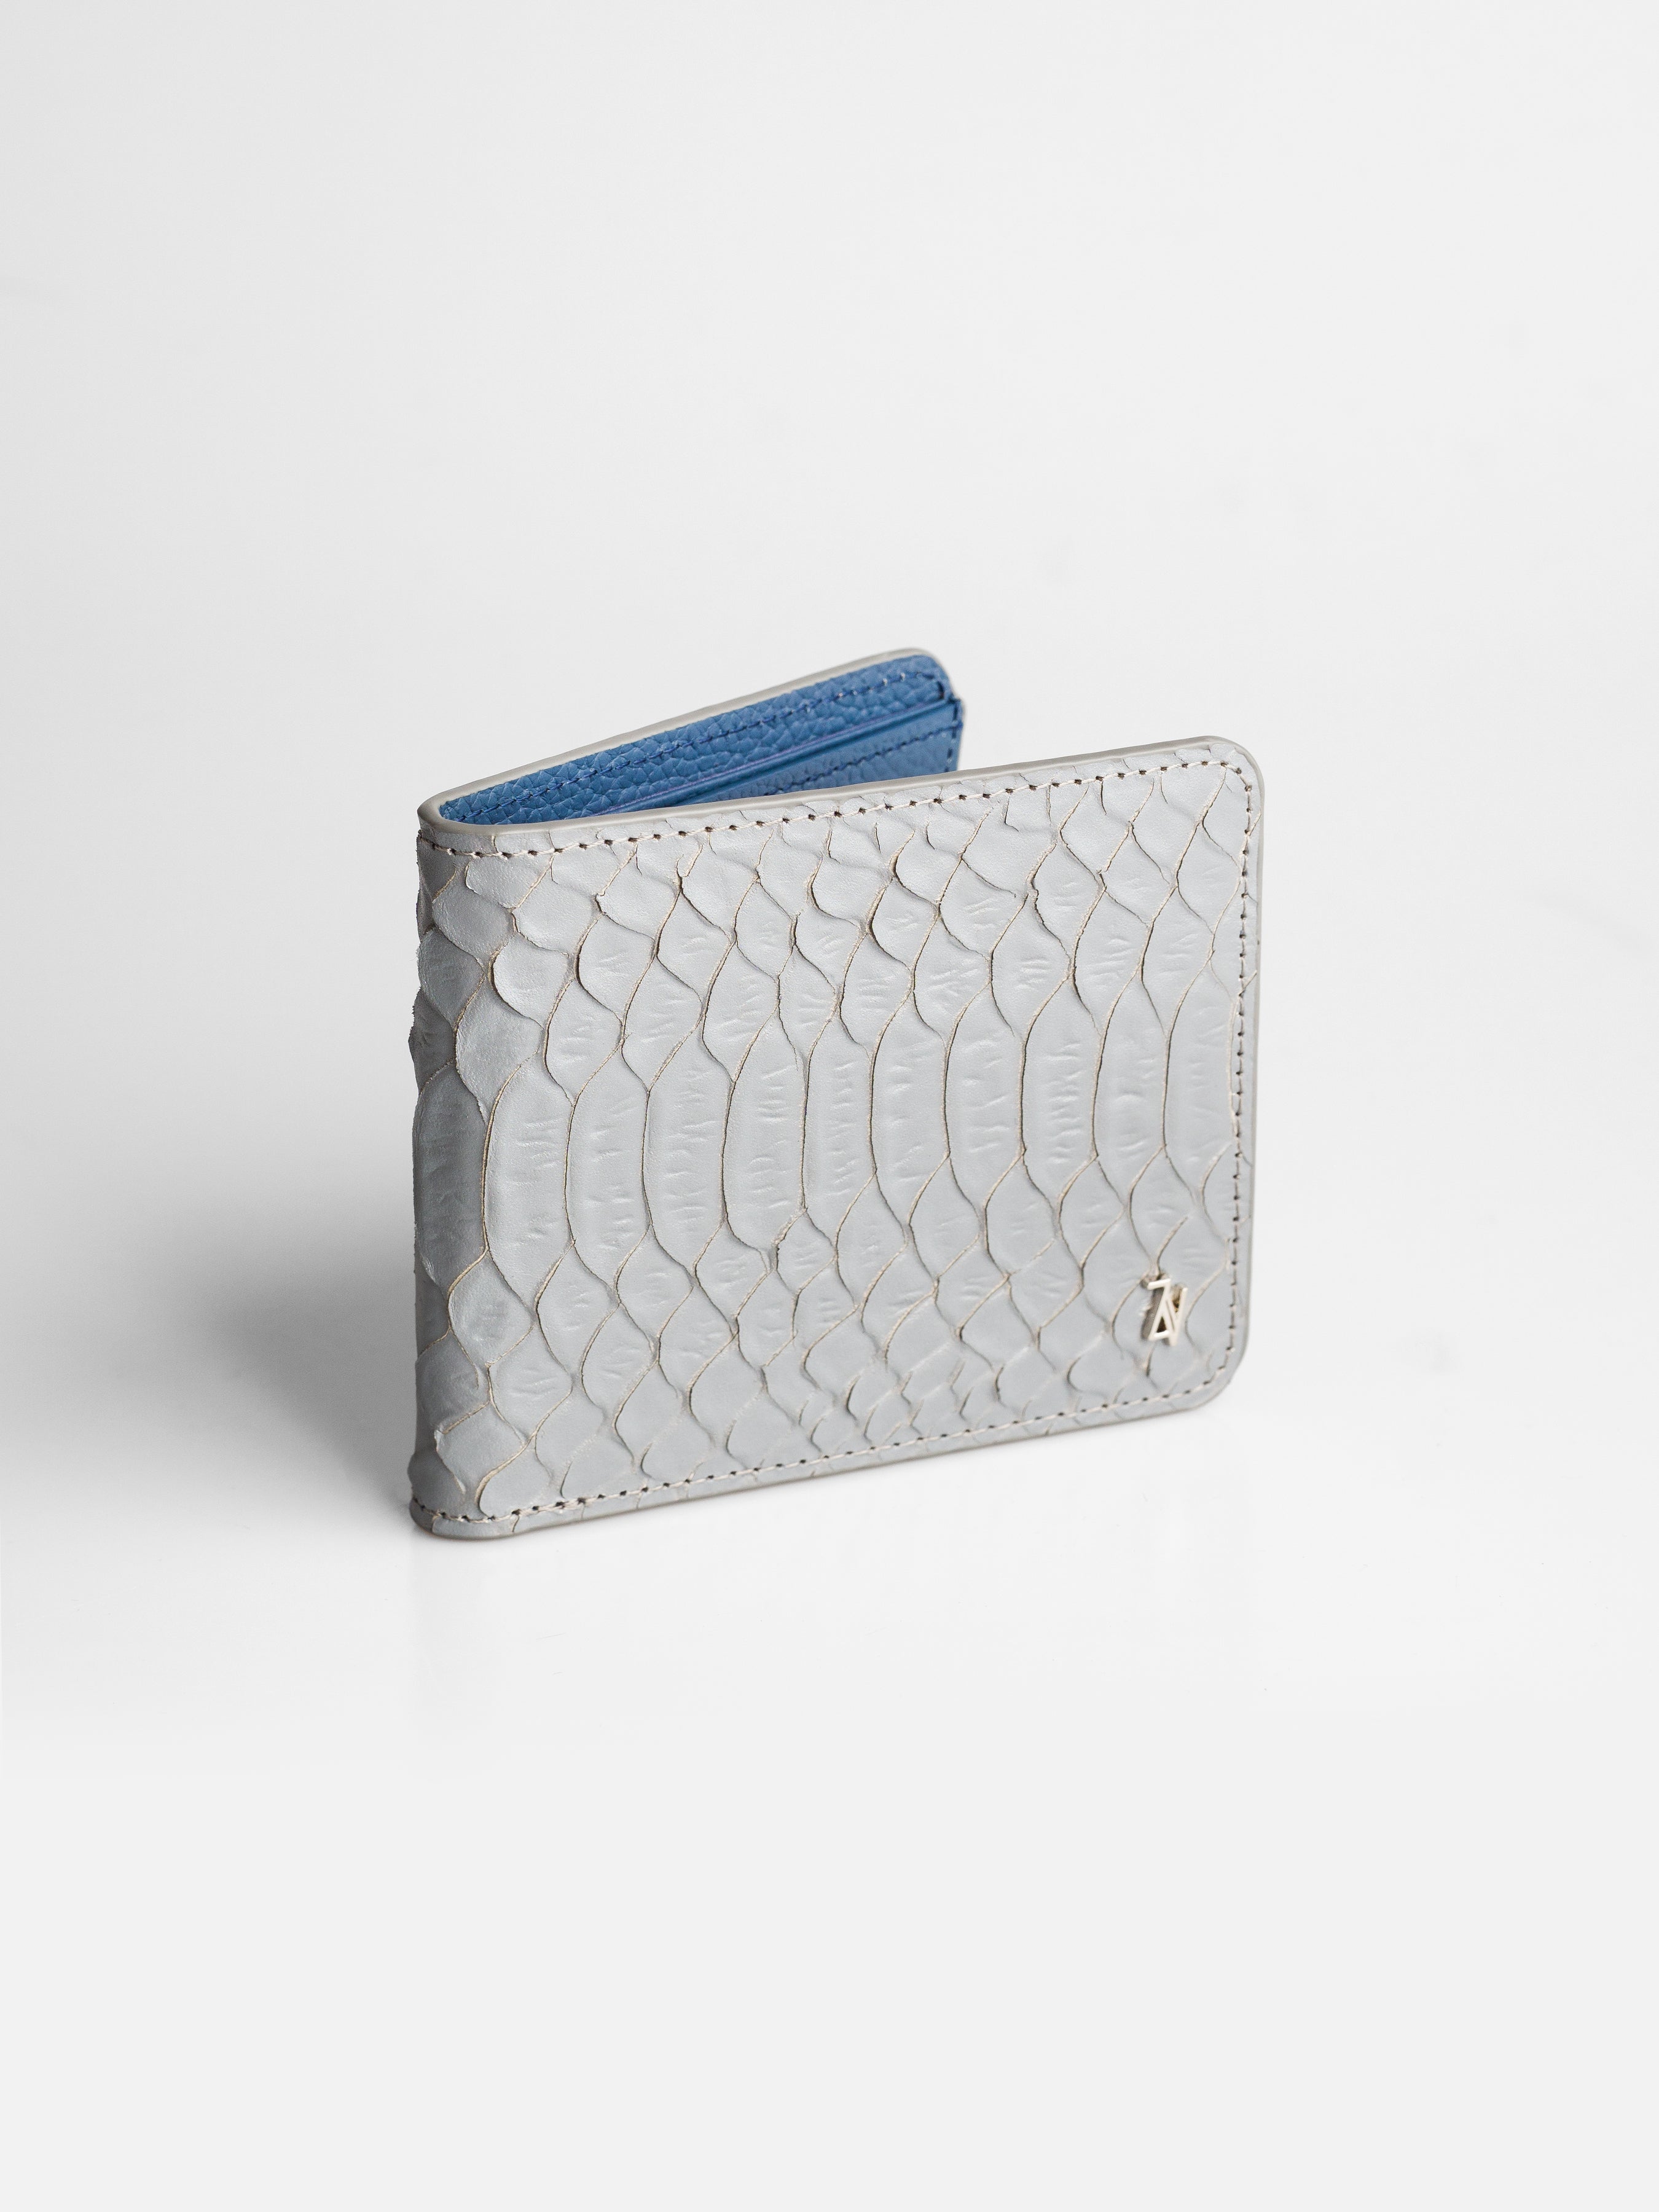 Artemis Python Wallet - Grey and Blue Leather